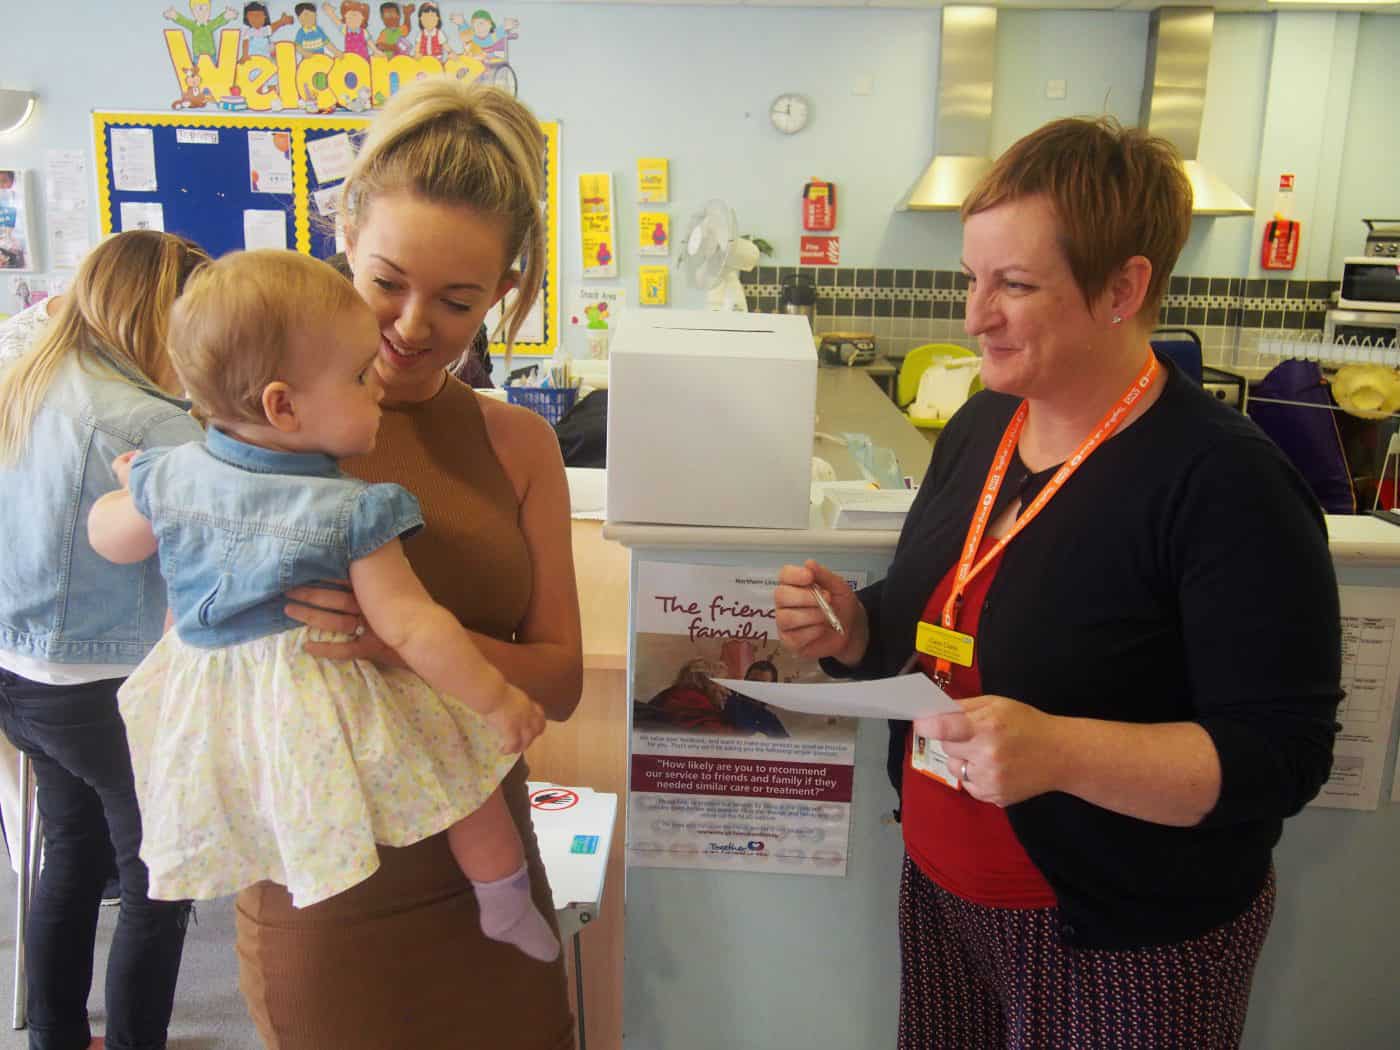 A woman with blonde hair holding a baby, looking at an older woman with short red hair who is writing something on a piece of paper. They're stood in a pre-school, with the kitchen visible in the background and on the right.